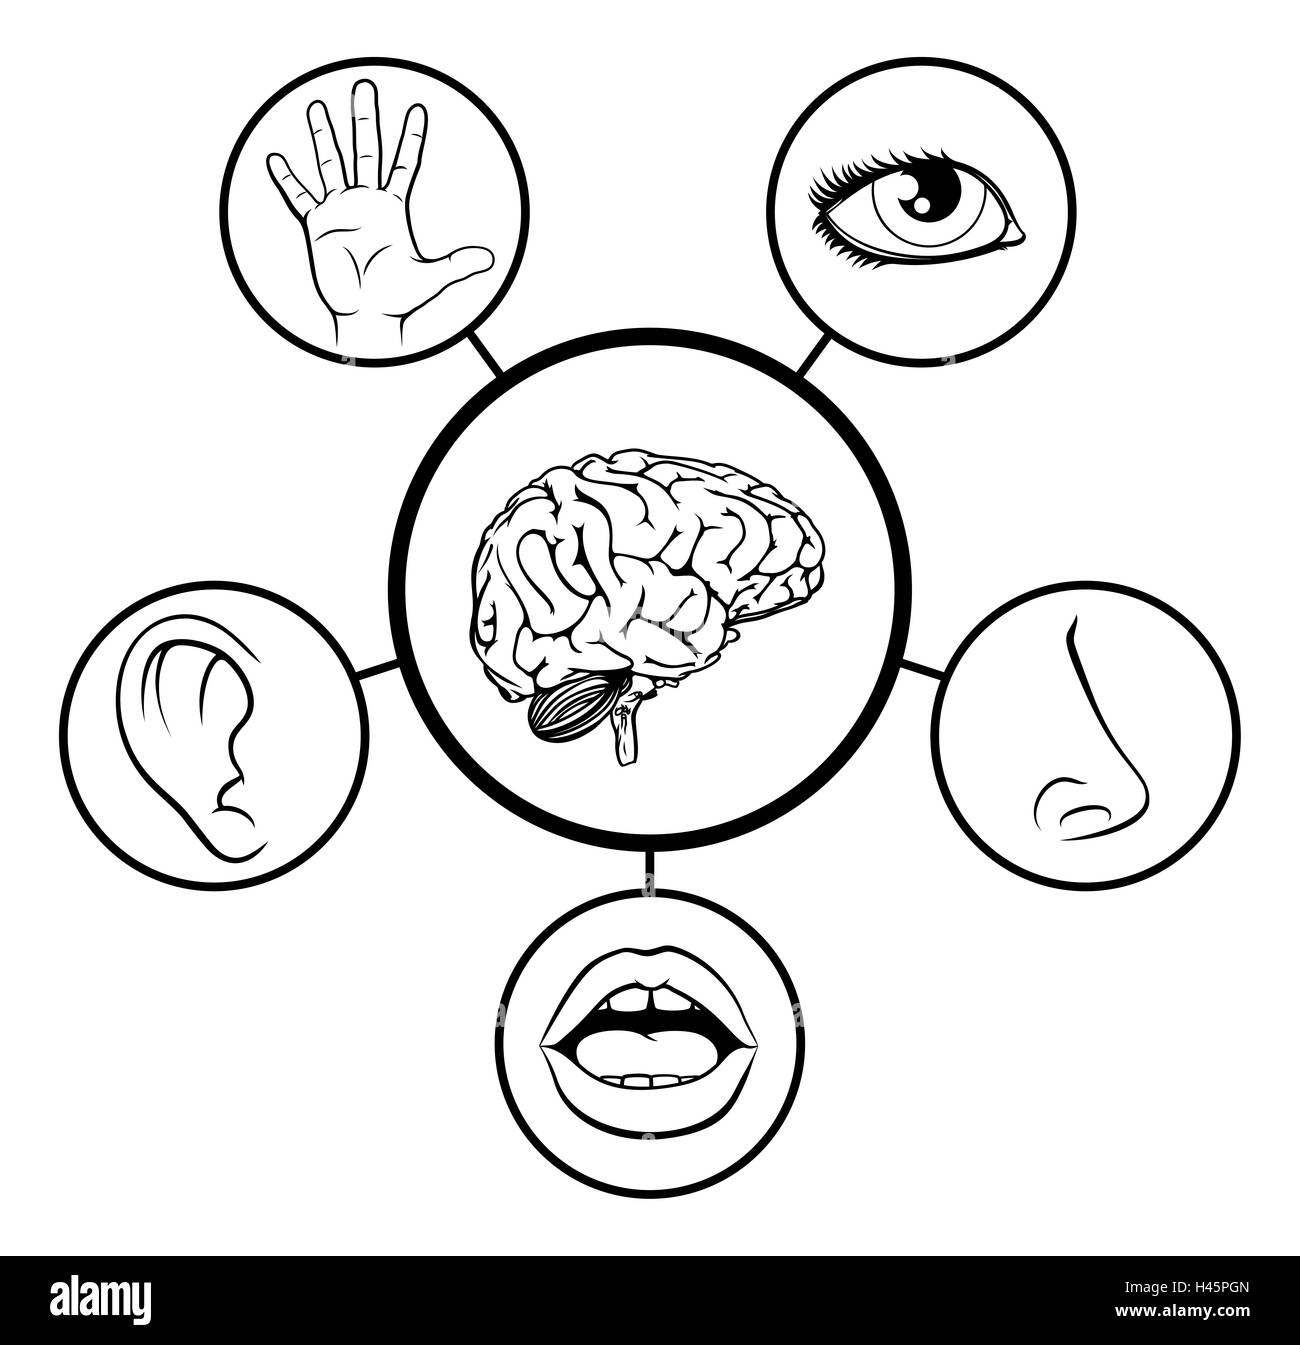 A science education illustration of icons representing the 5 senses attached to central brain in black and white Stock Photo